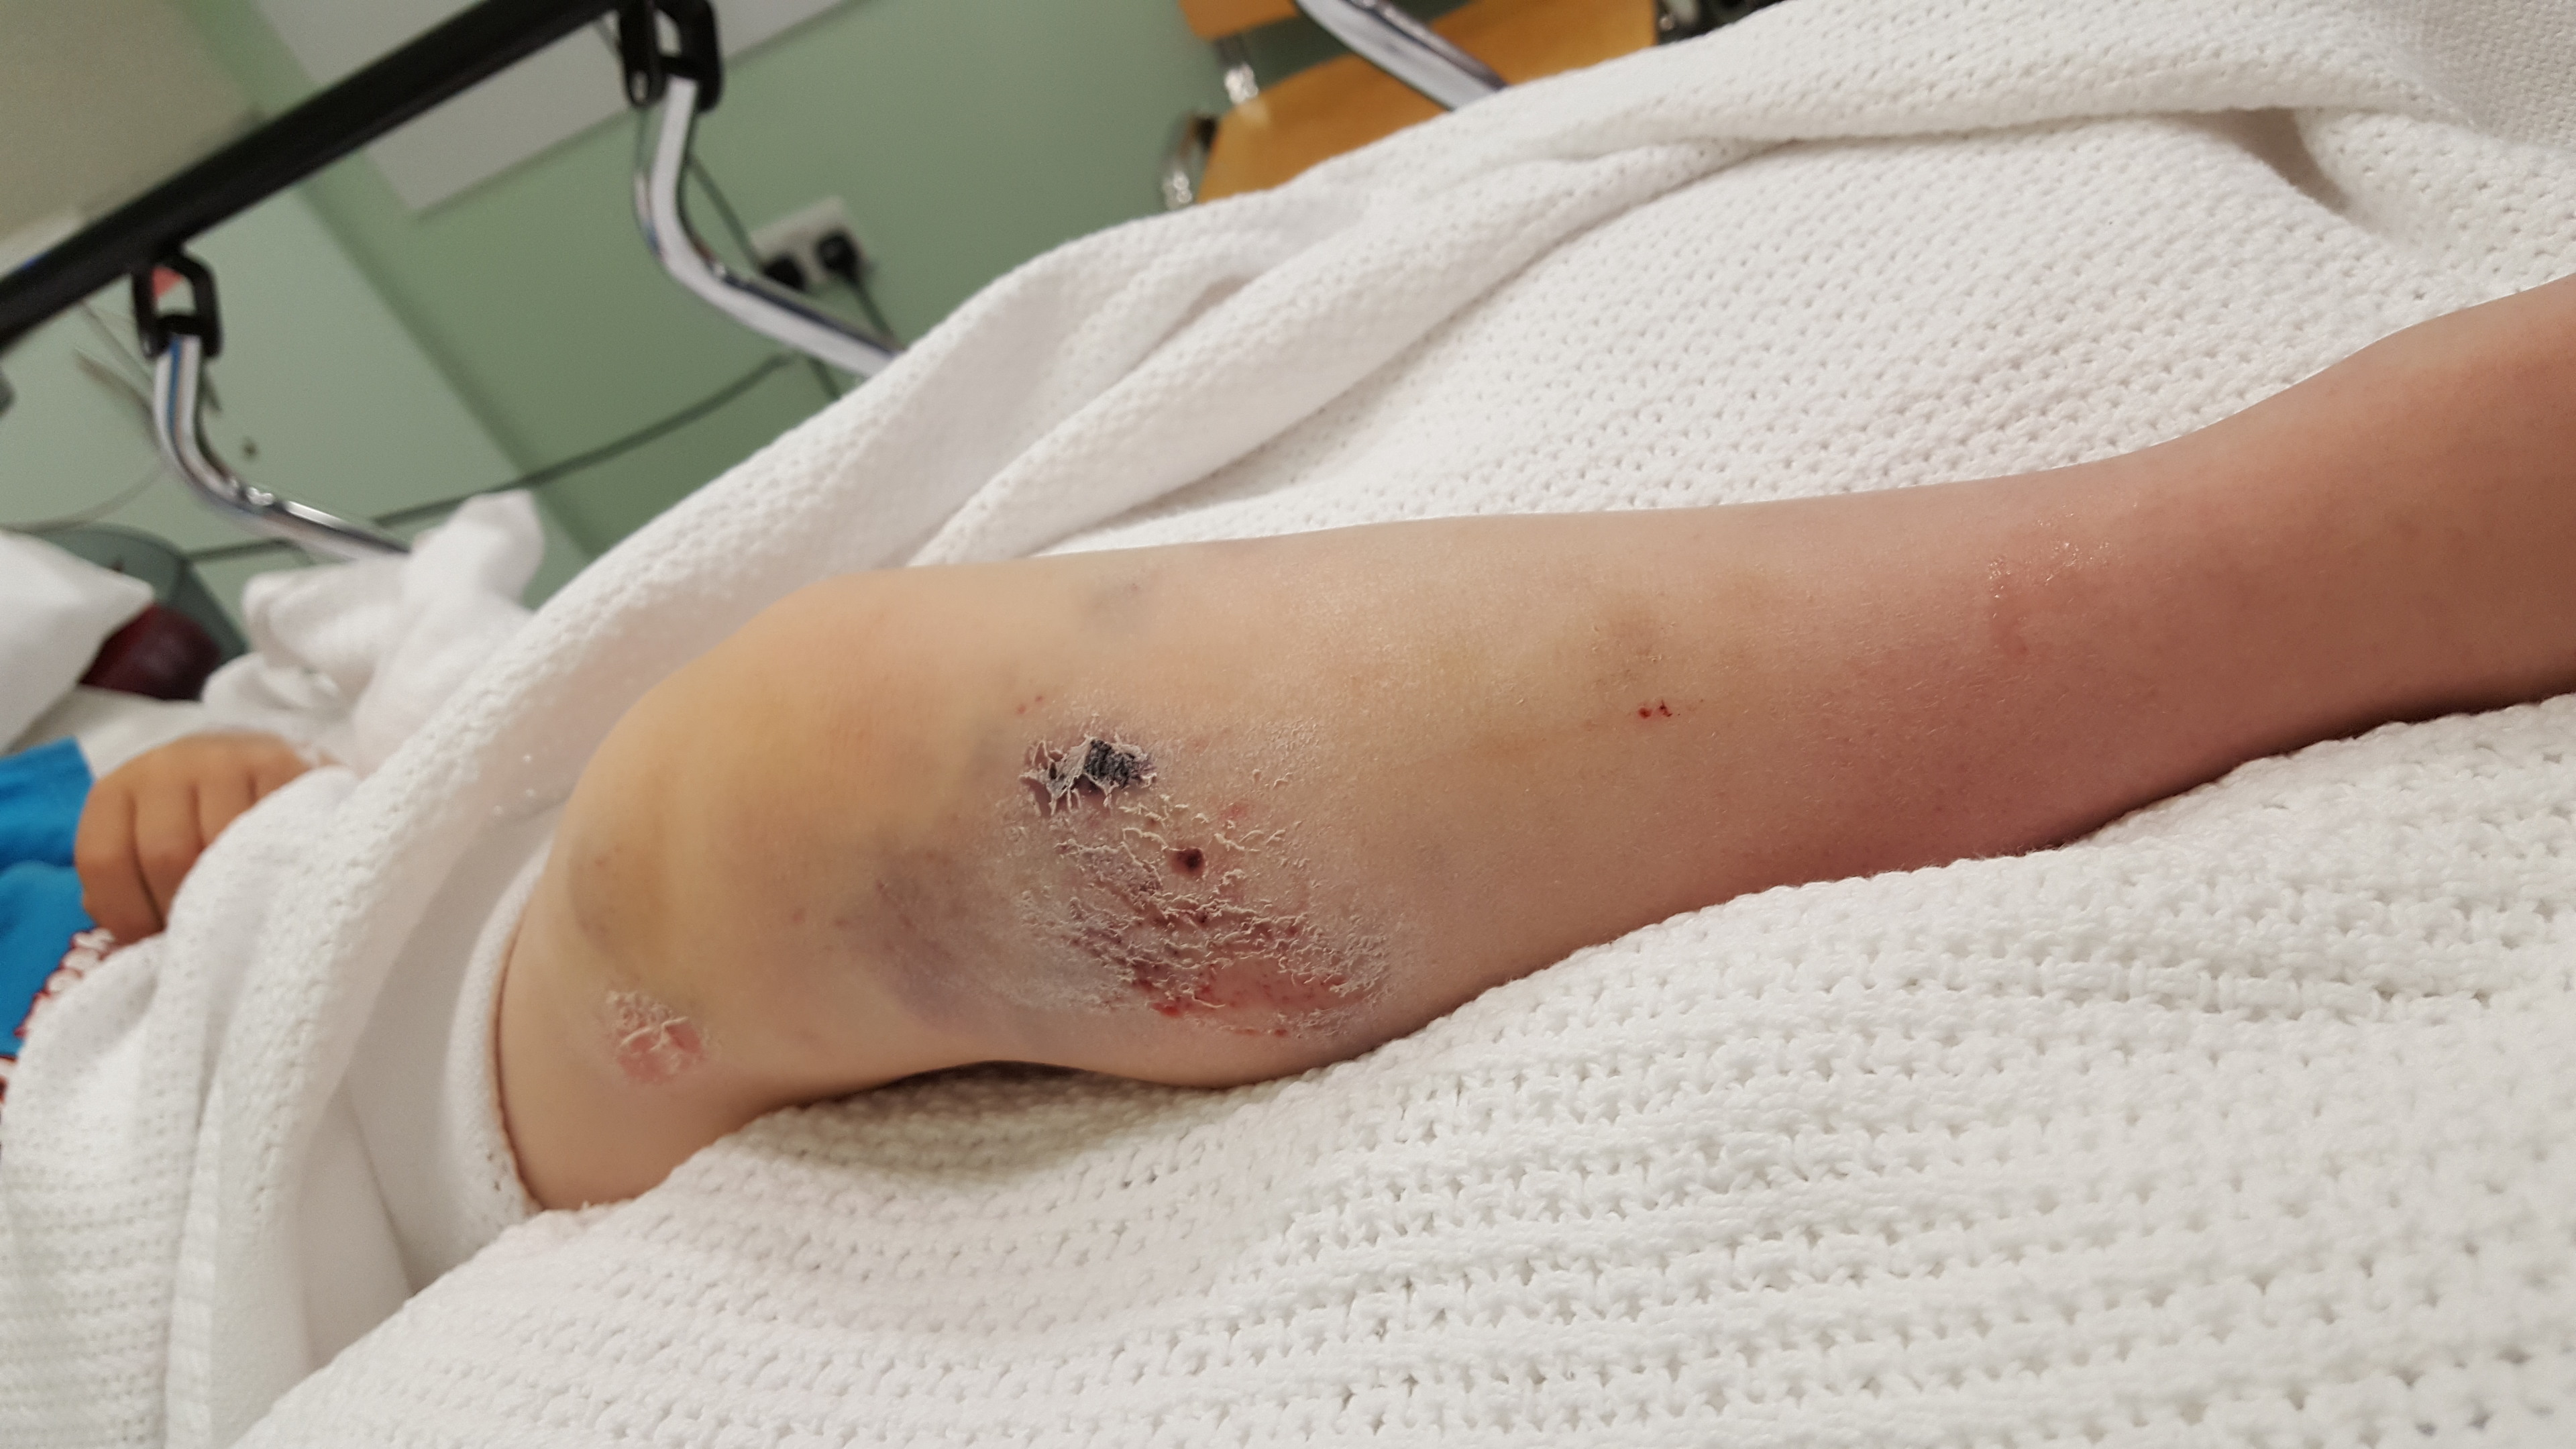 The injury to Max's leg after being crushed by a falling stone